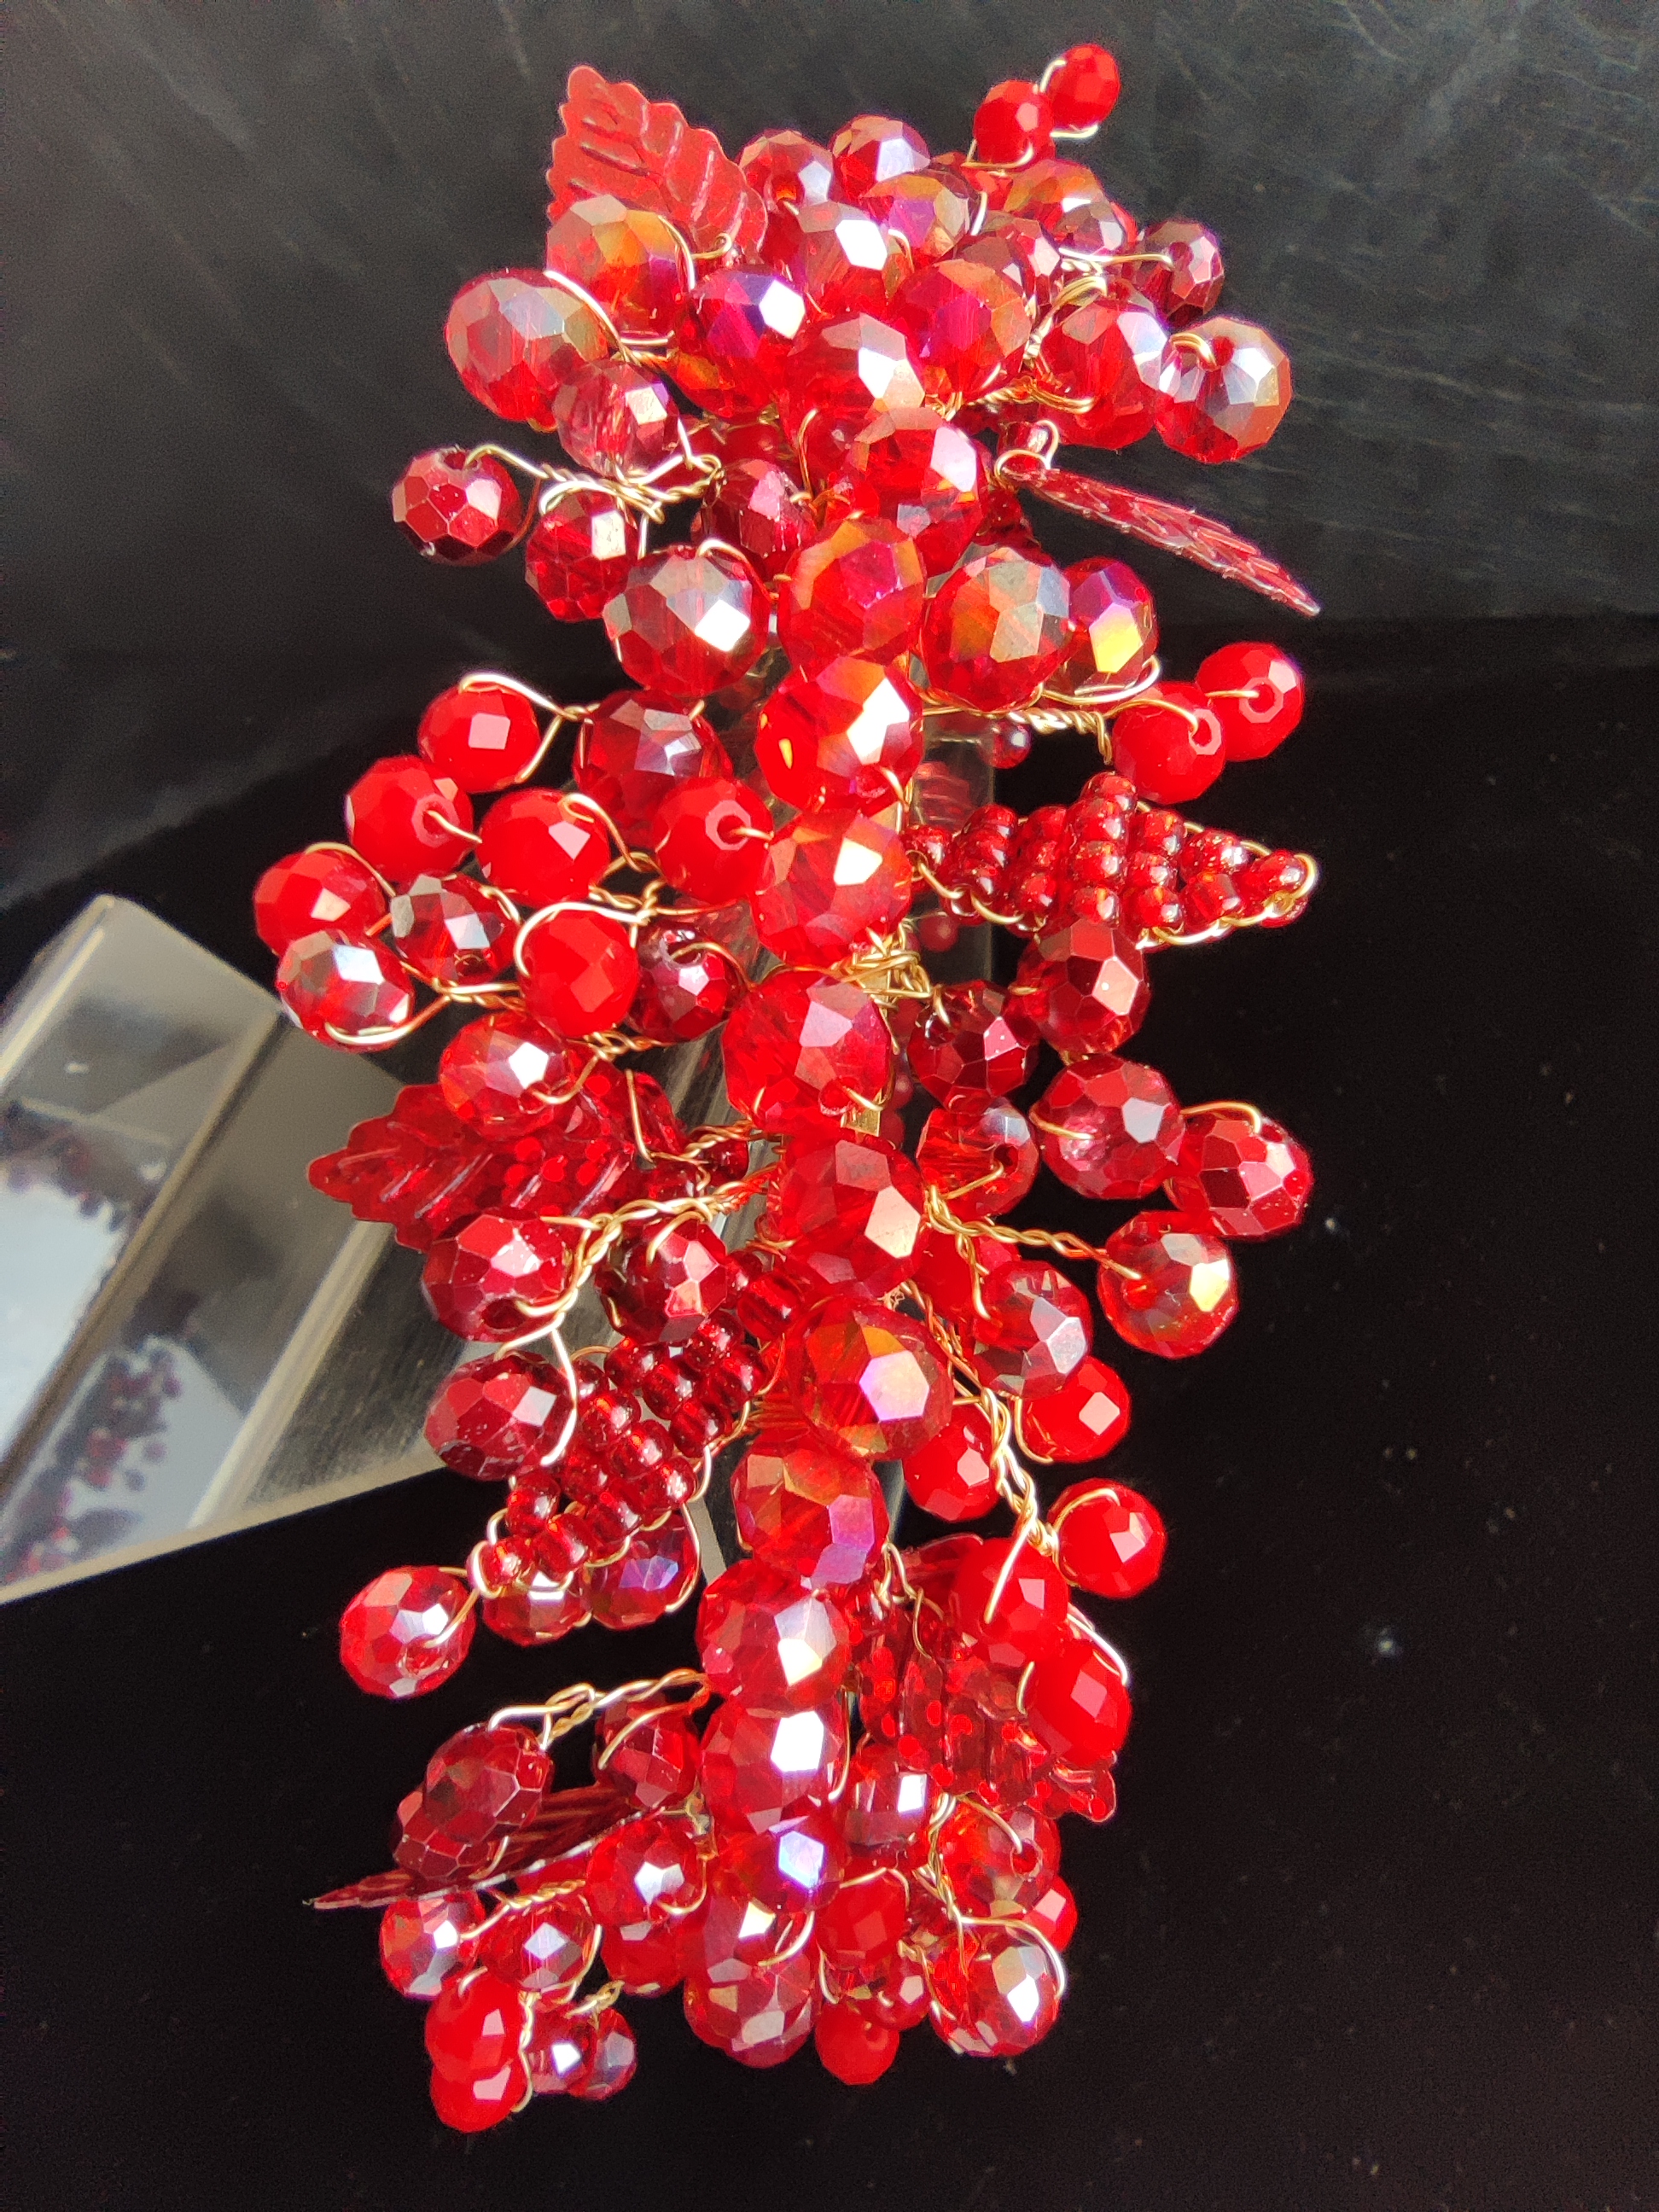 Exclusive Handcrafted Red Tiara With Crystals and Leaves - Fiery Seduction